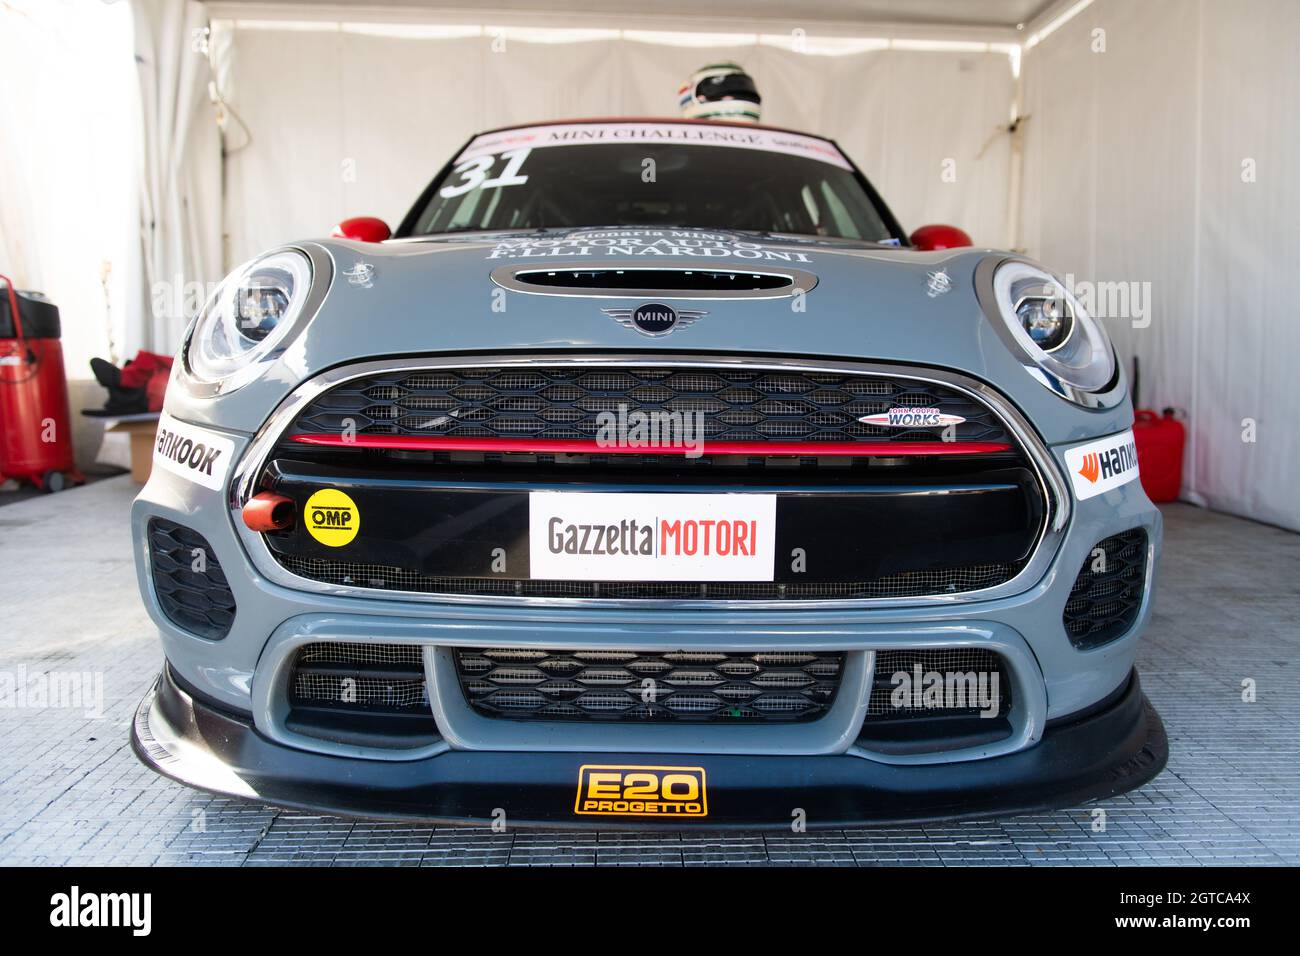 Vallelunga, italy september 18th 2021 Aci racing weekend. Mini Cooper race car competition standing in motorsport showroom no people low angle view Stock Photo